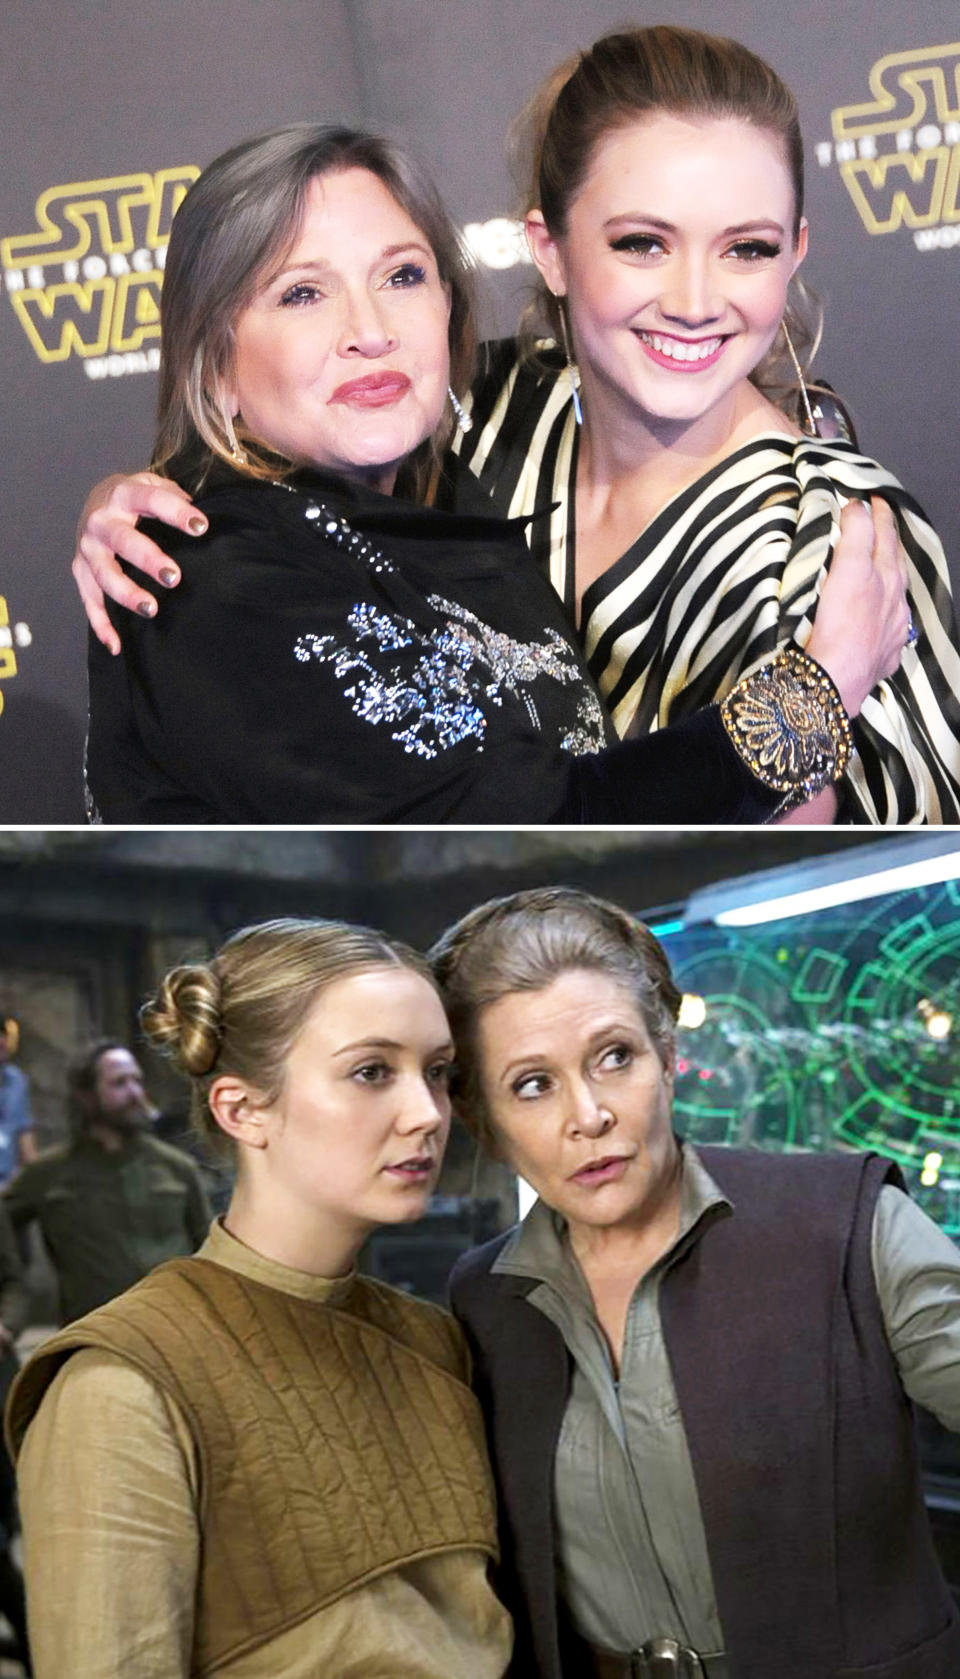 While promoting Star Wars: The Last Jedi in late 2017, exactly a year after Carrie Fisher died, Billie revealed that she and her mother attempted to sneak into a showing of The Force Awakens on opening weekend, but it didn't go according to plan. Billie hilariously said there was 